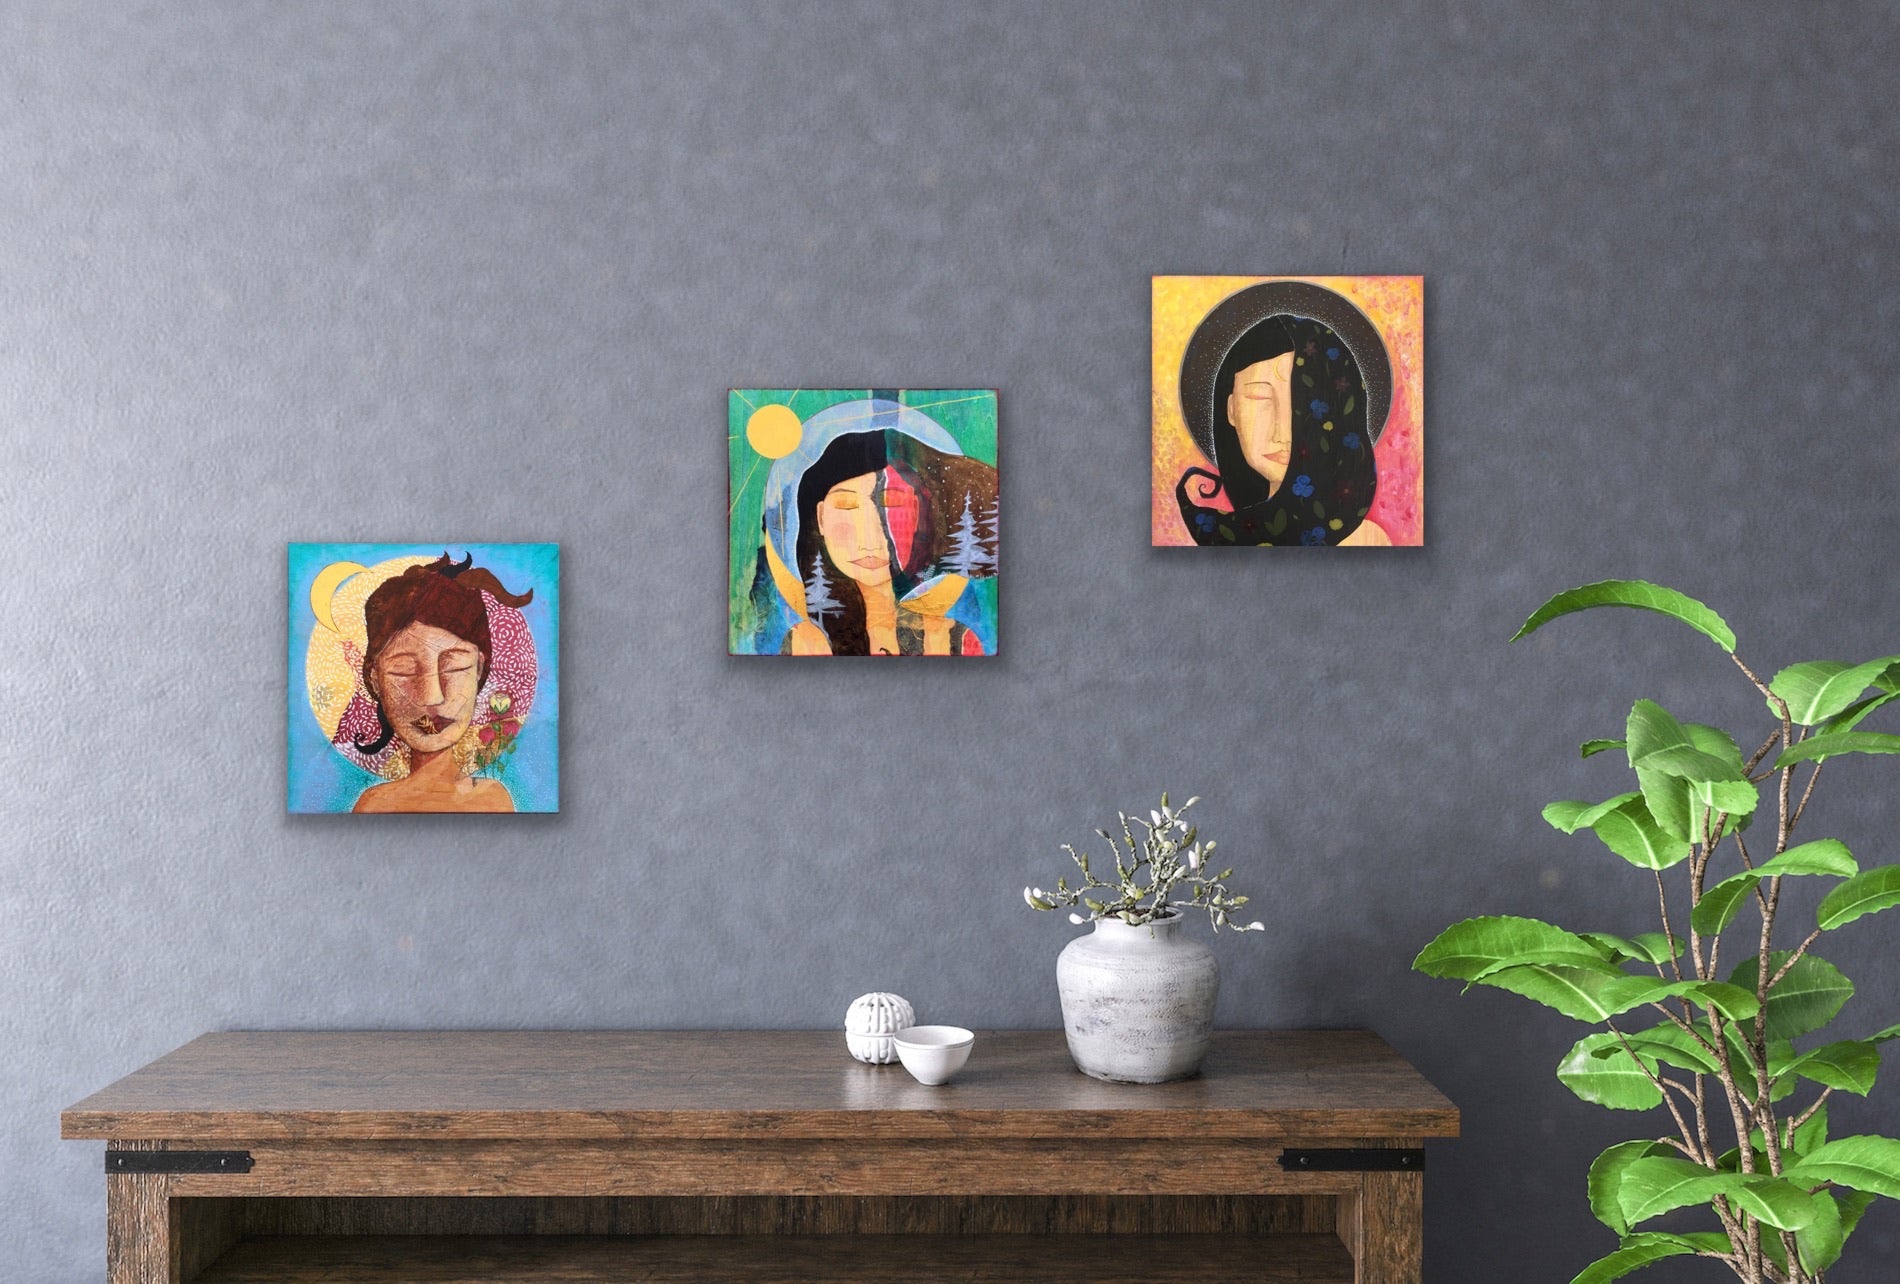 three vibrant, colorful mixed media feminine artworks hanging on a gray wall above a wooden table with white pots and a flower. beside the table is a large green plant